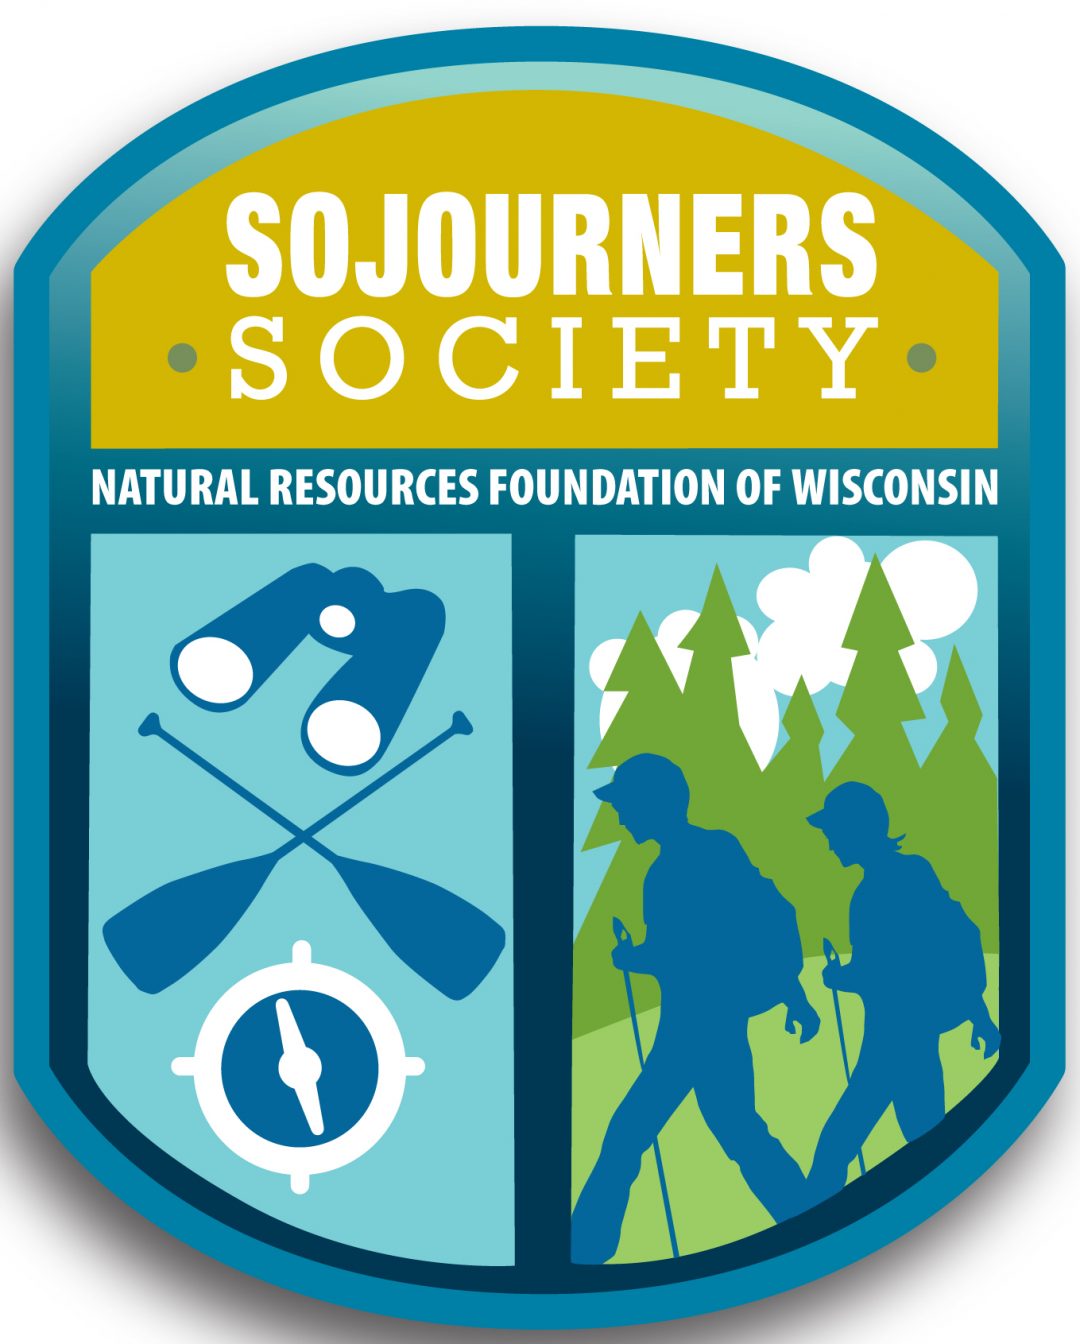 Sojourners Society Logo - Natural Resources Foundation of Wisconsin